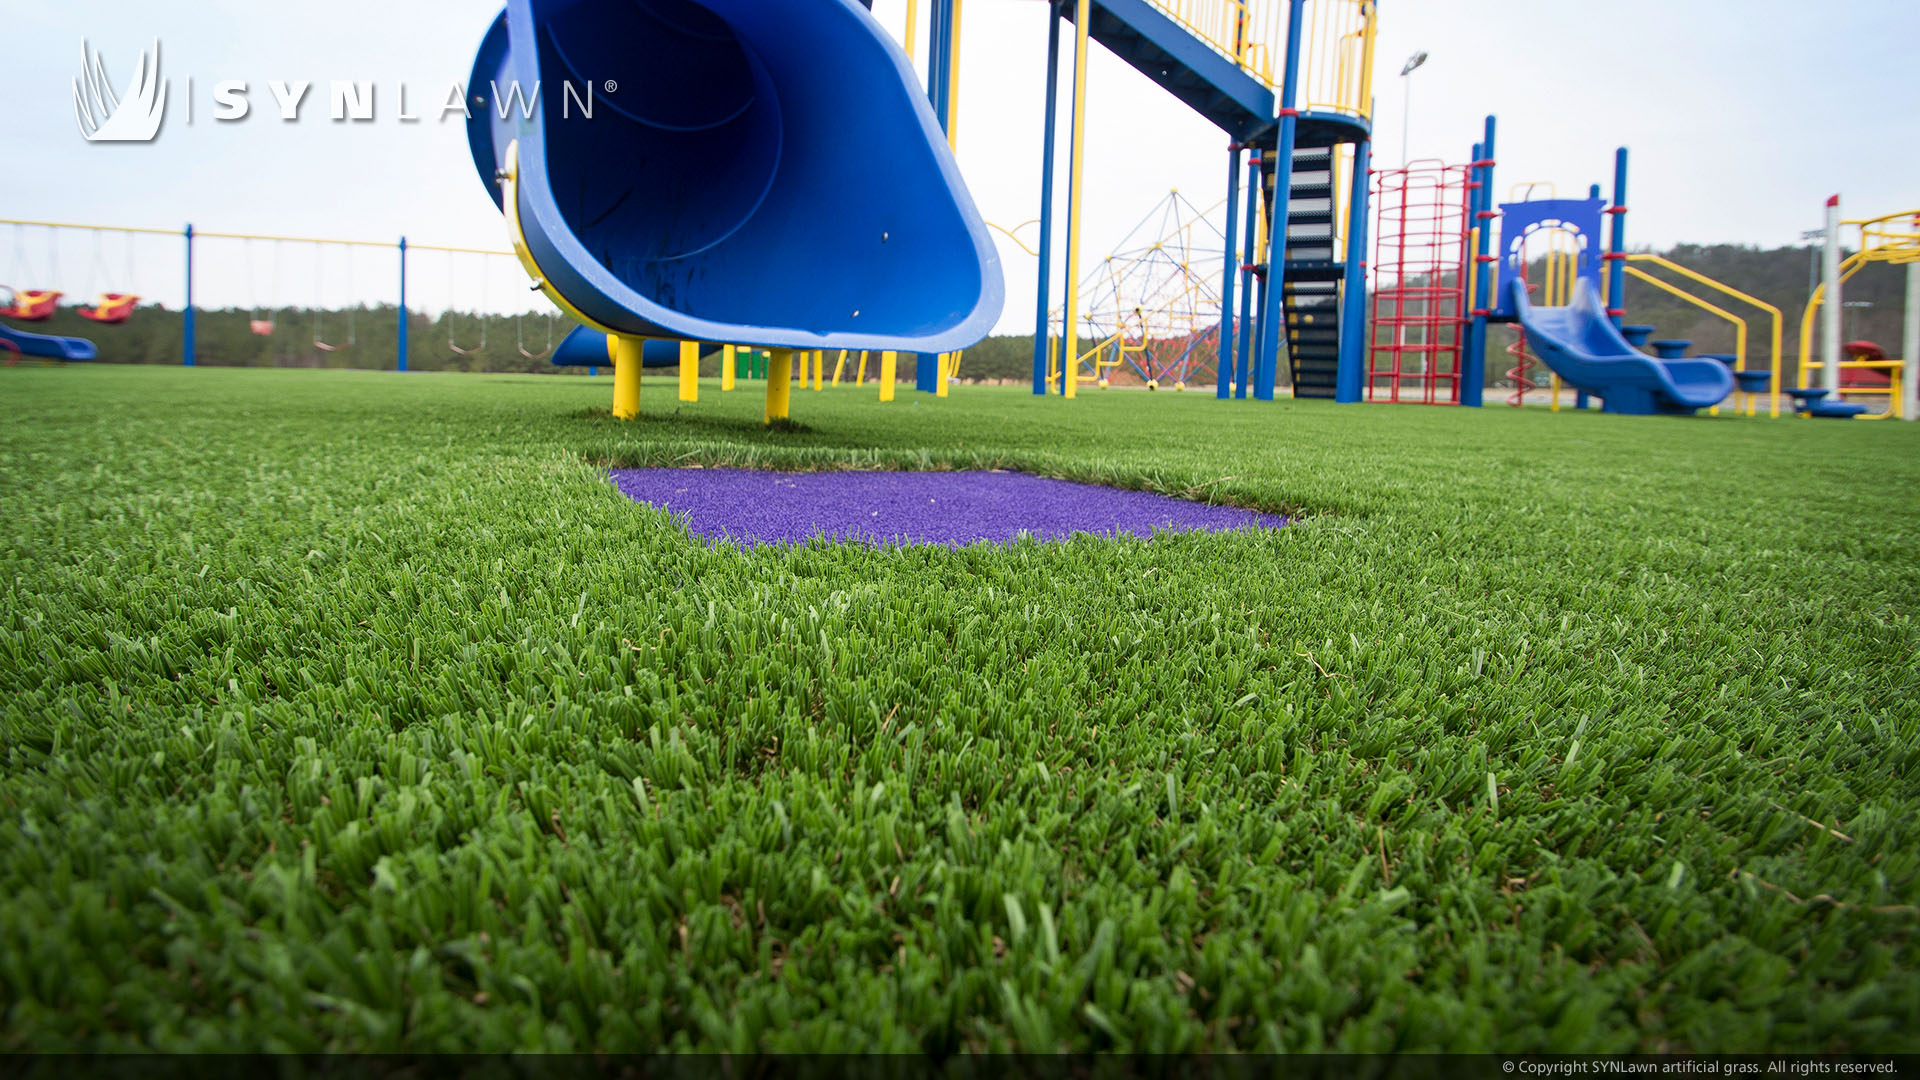 Slide and jungle gym on artificial playground turf